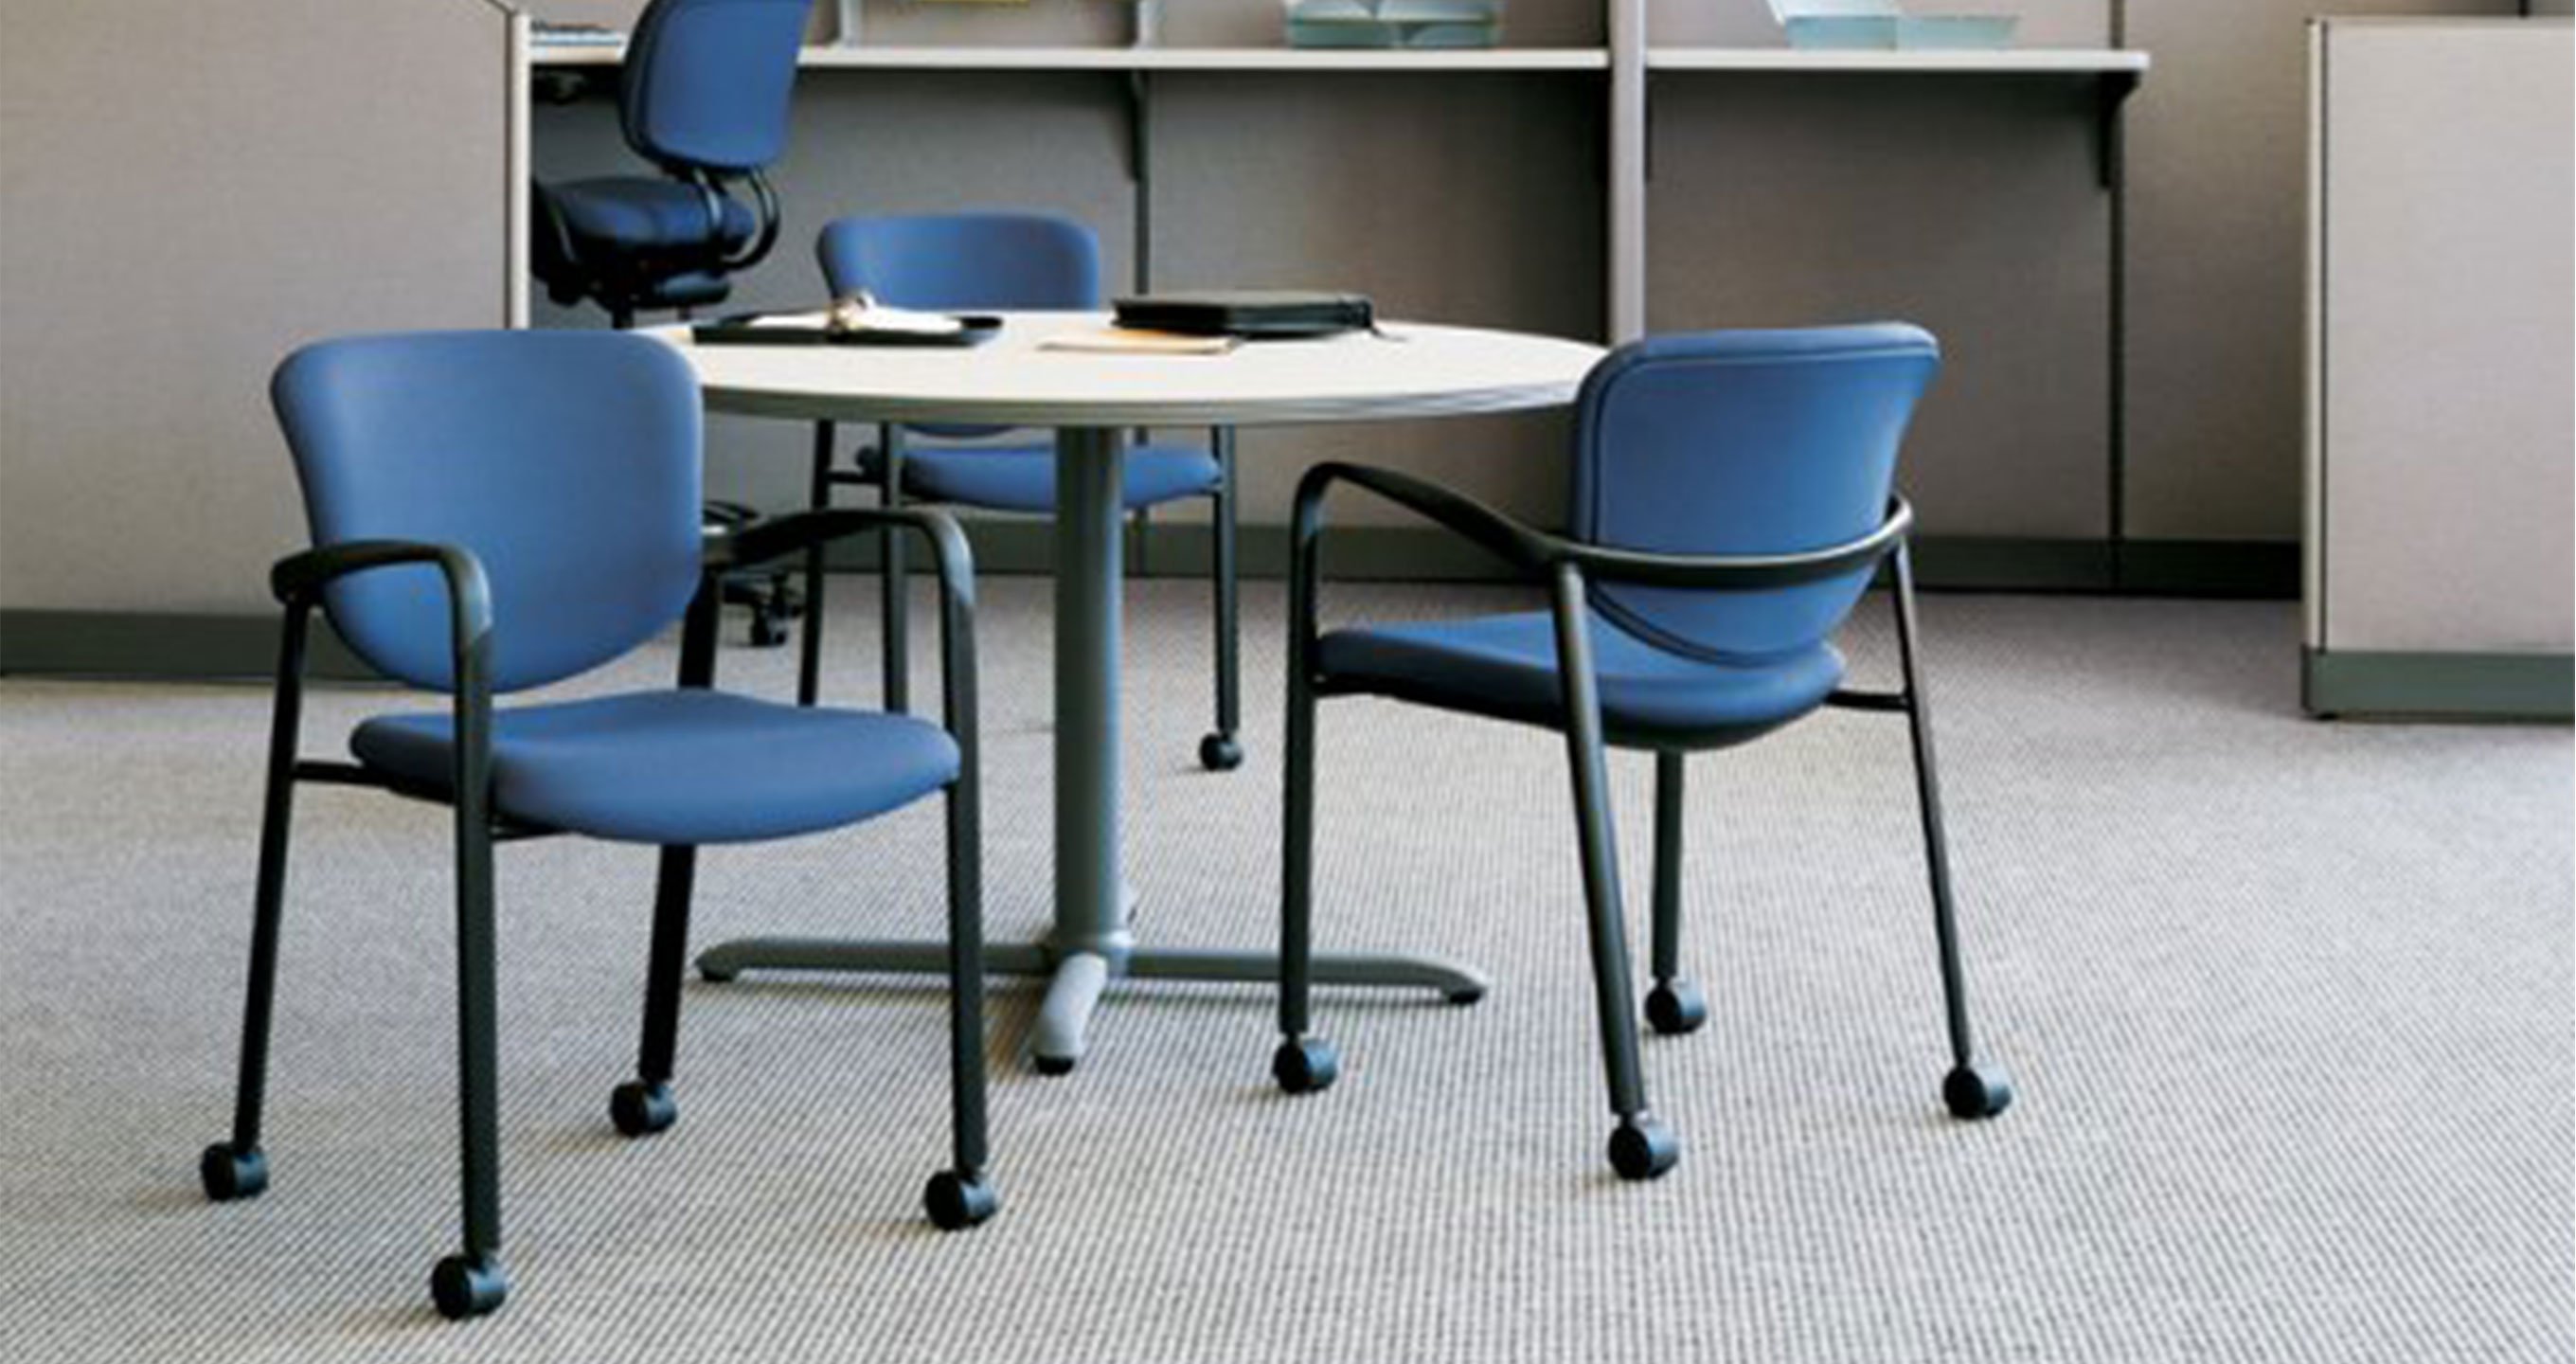 Haworth Improv side chair in blue upholstery and wheels in a conference room